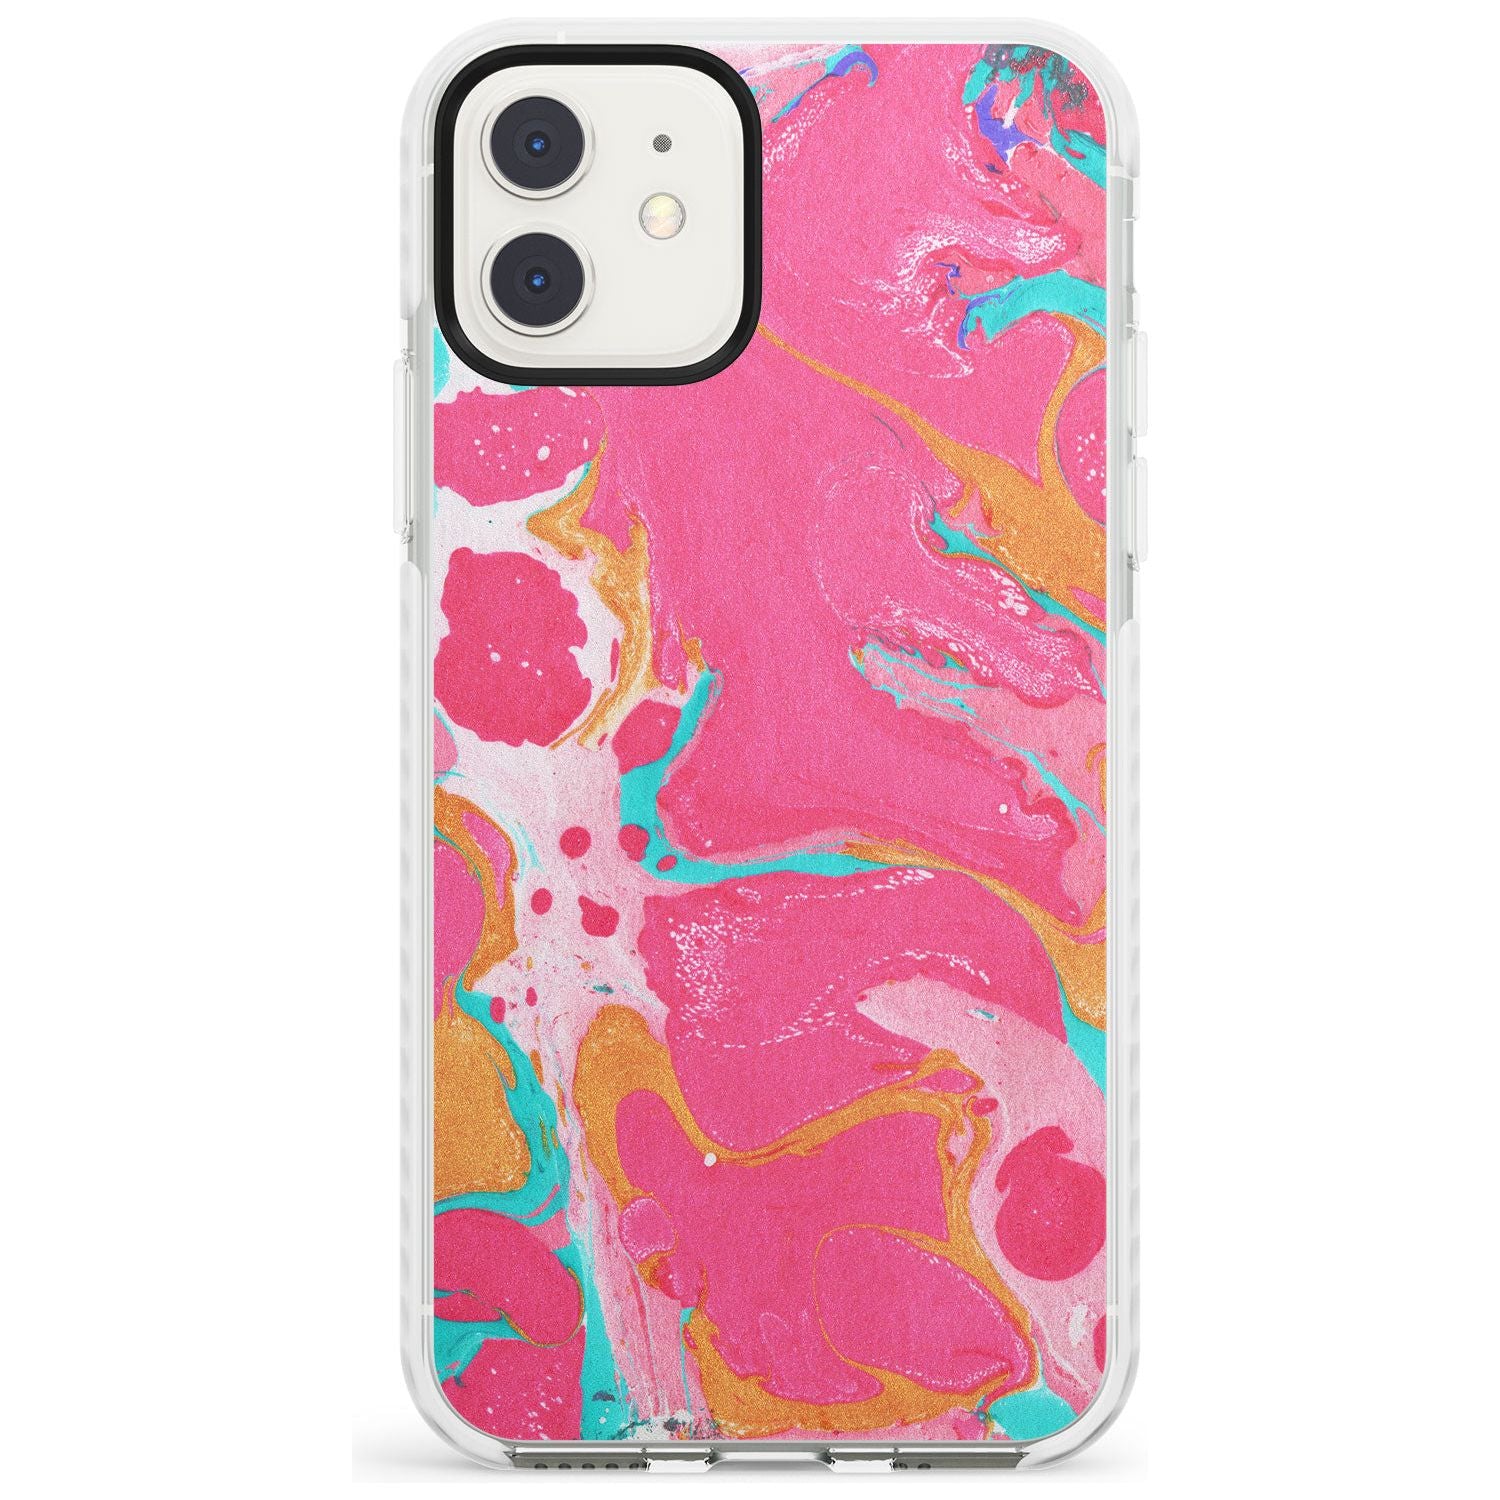 Pink, Orange & Turquoise Marbled Paper Pattern Impact Phone Case for iPhone 11